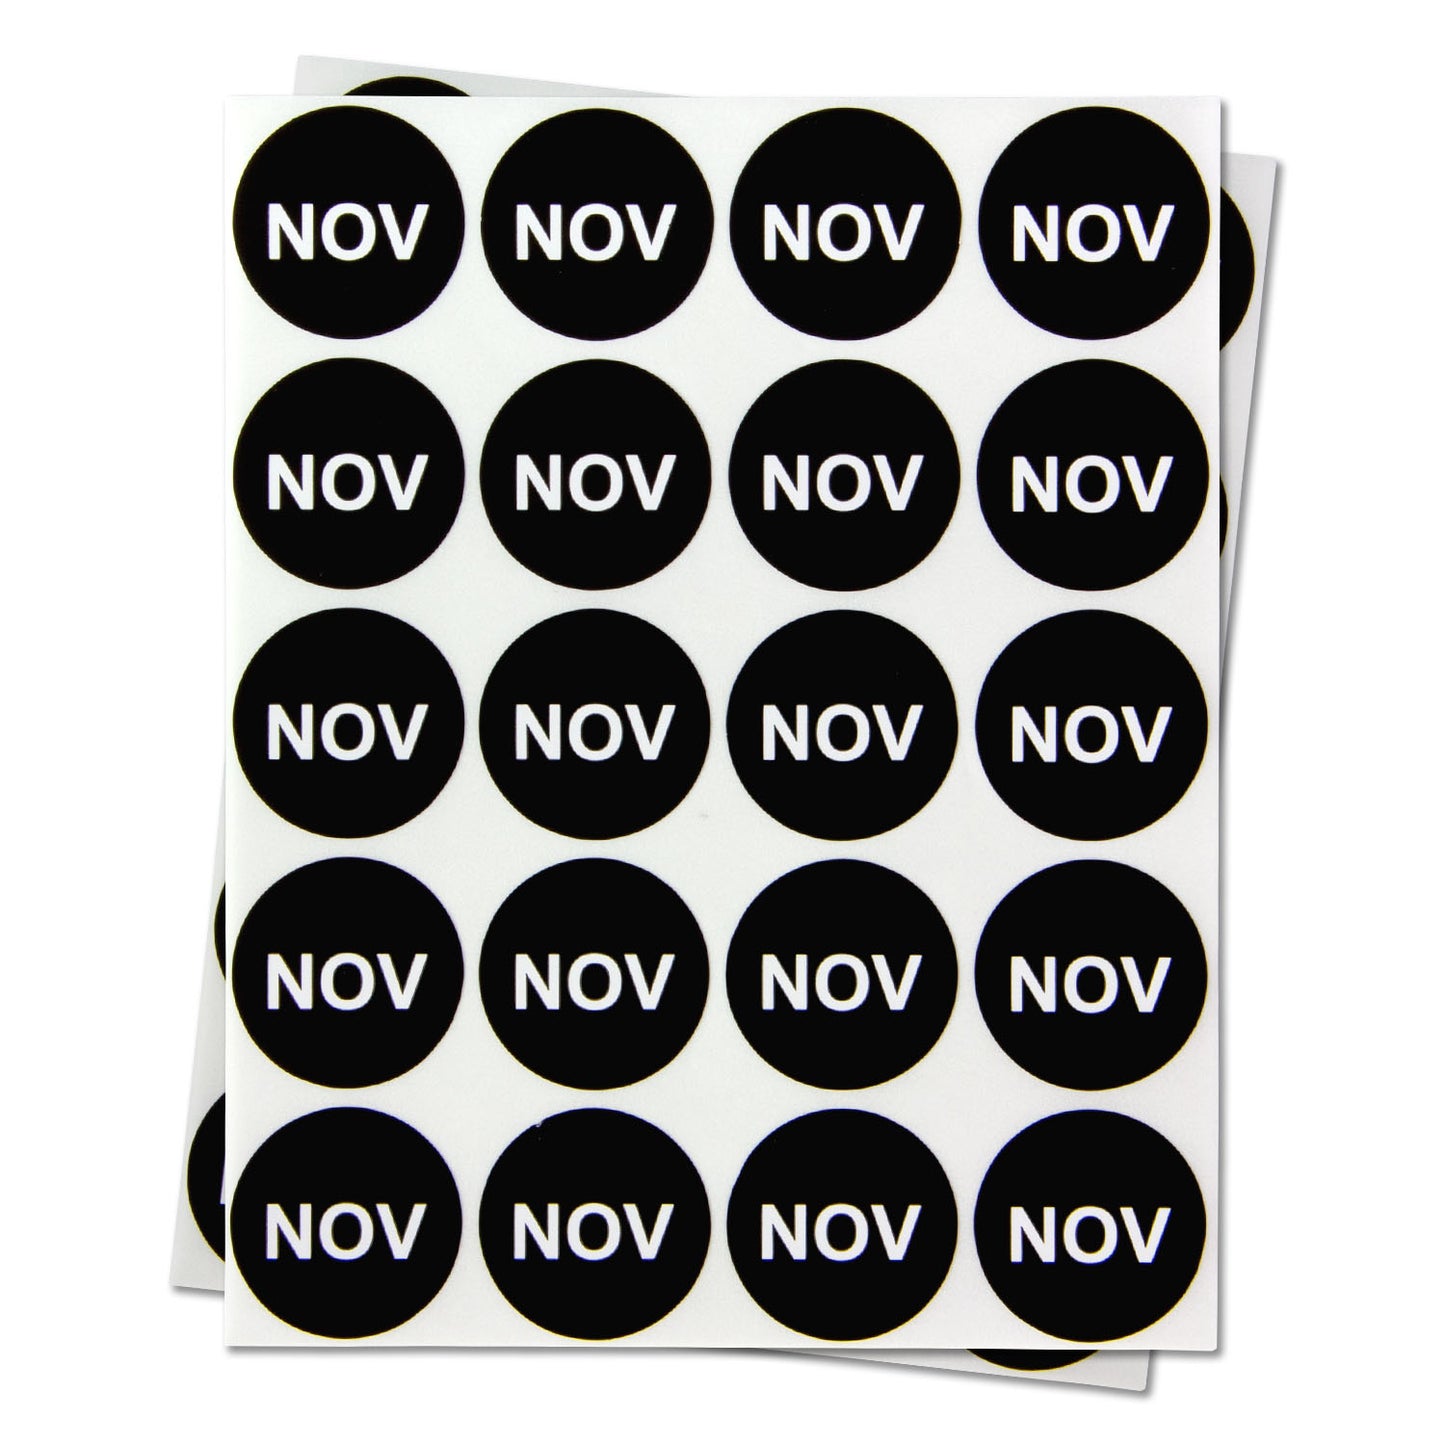 1 inch | Months of the Years: November Stickers